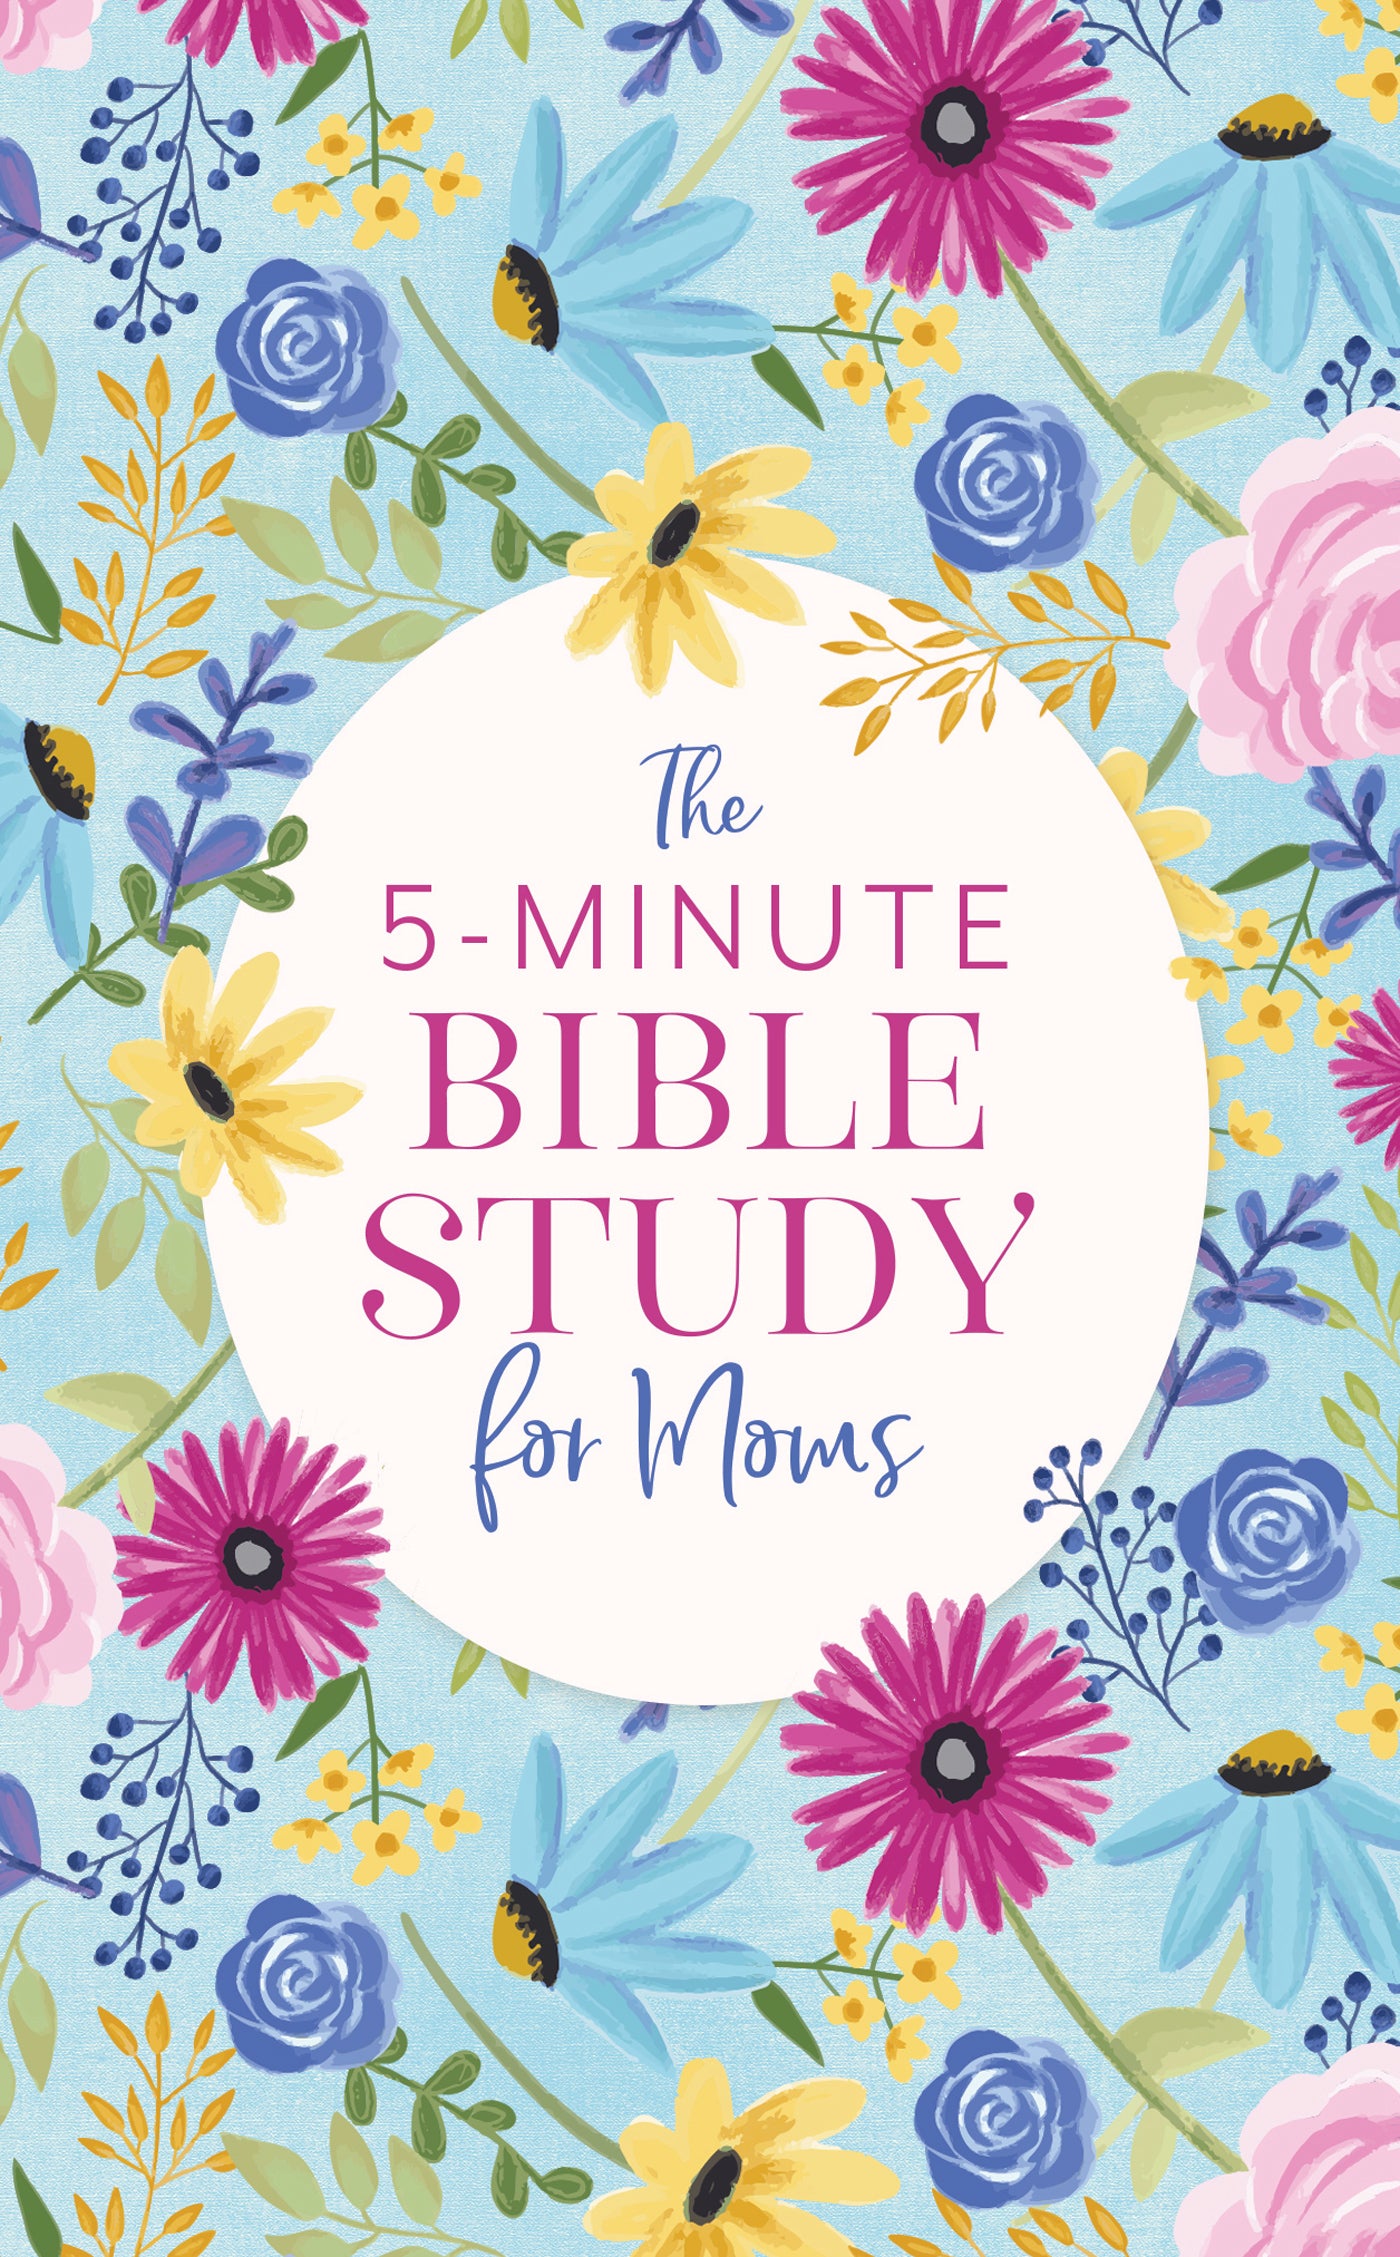 The 5-Minute Bible Study for Moms - The Christian Gift Company